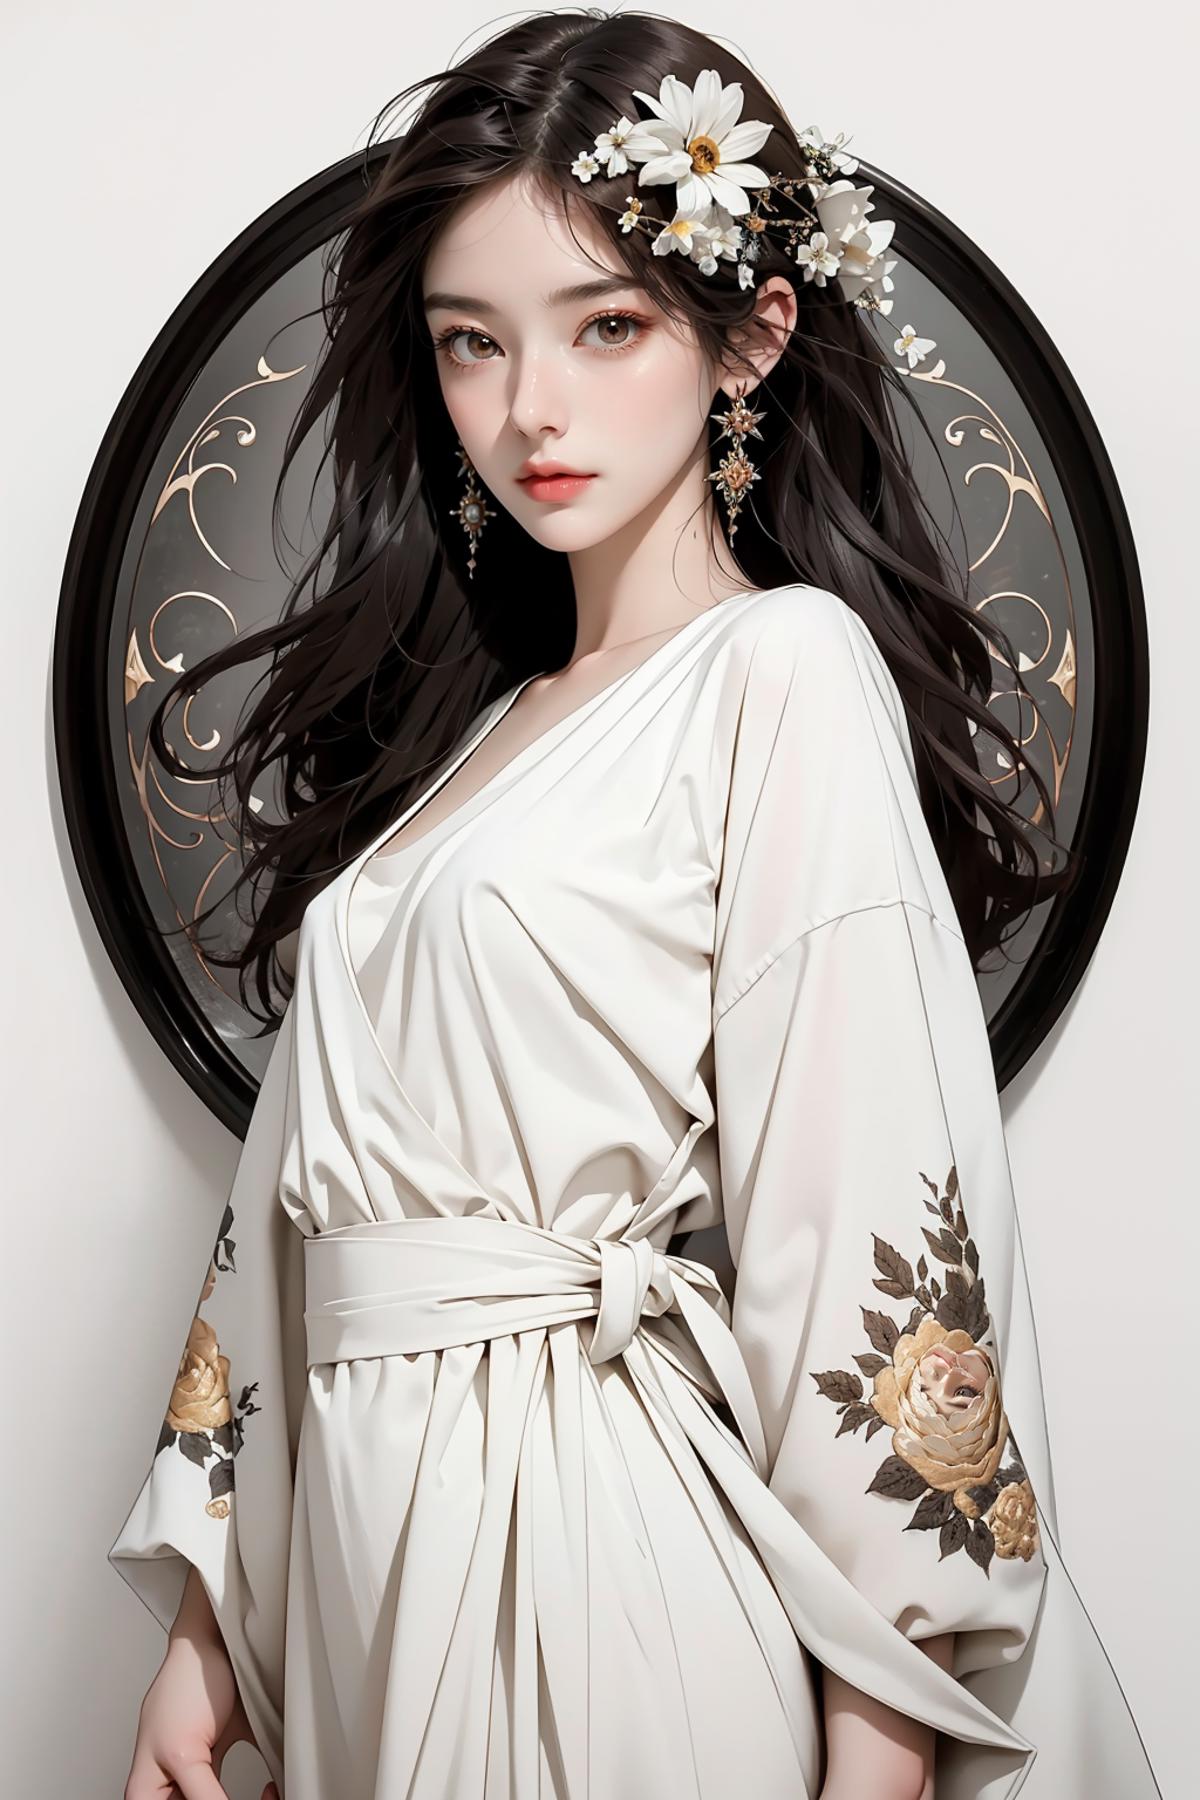 A beautiful Asian woman wearing a white dress with a flower design.